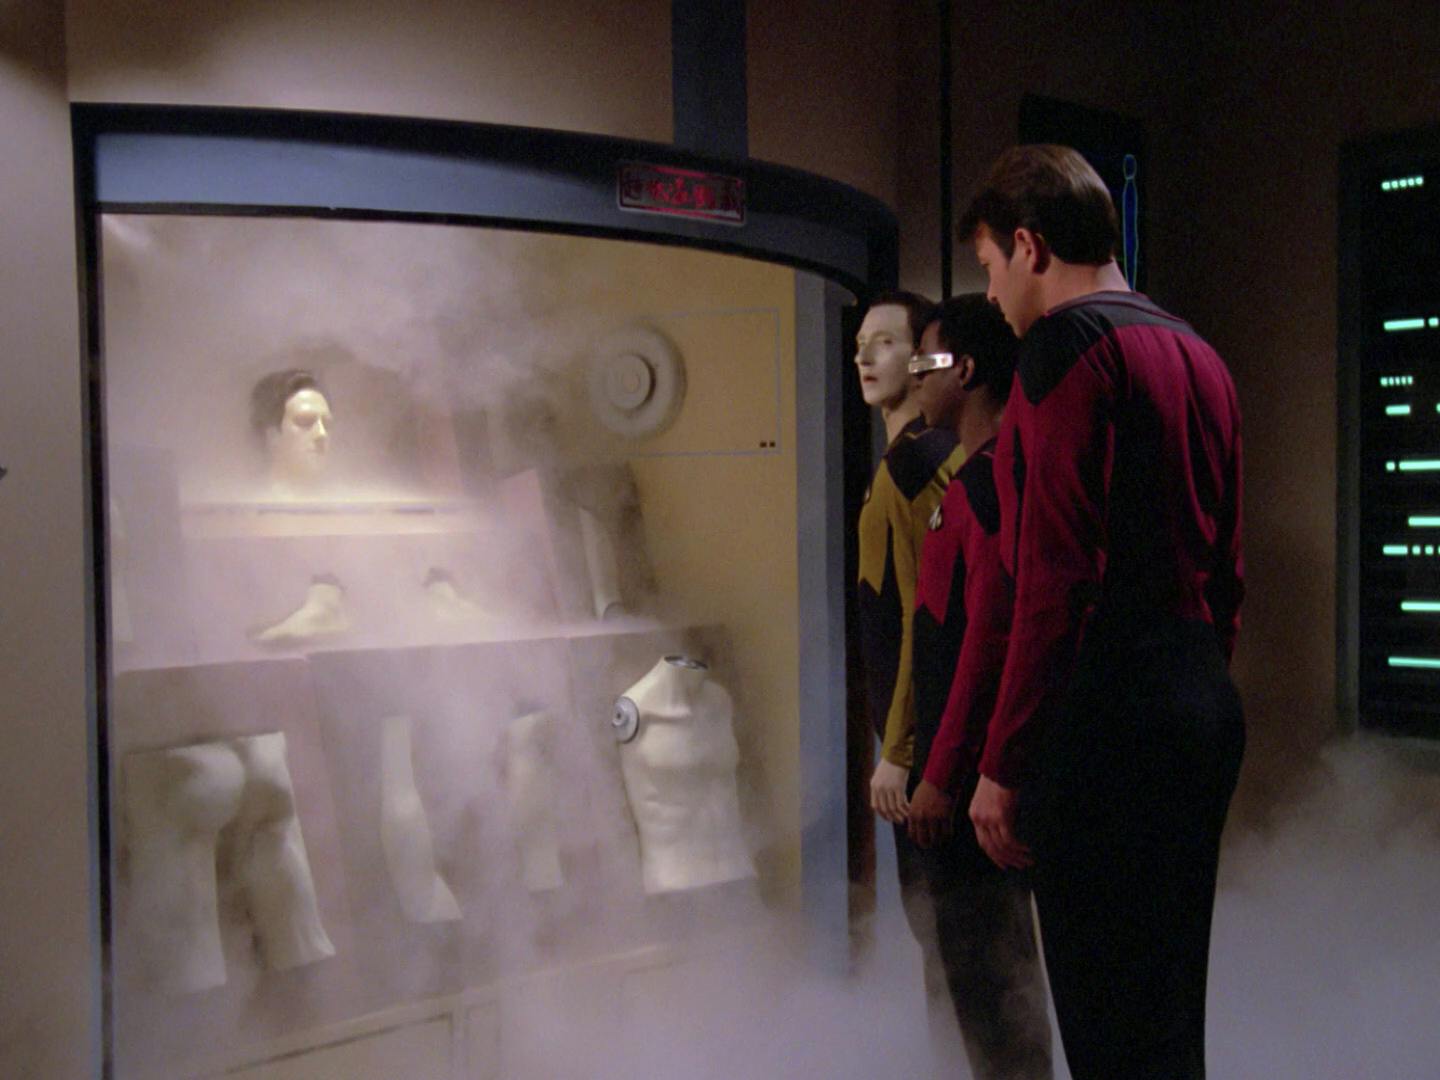 On Omicron Theta, at the lab of Data's discovery, Data, Geordi La Forge and Will Riker find a storage unit for parts for an android identical to Data in 'Datalore'